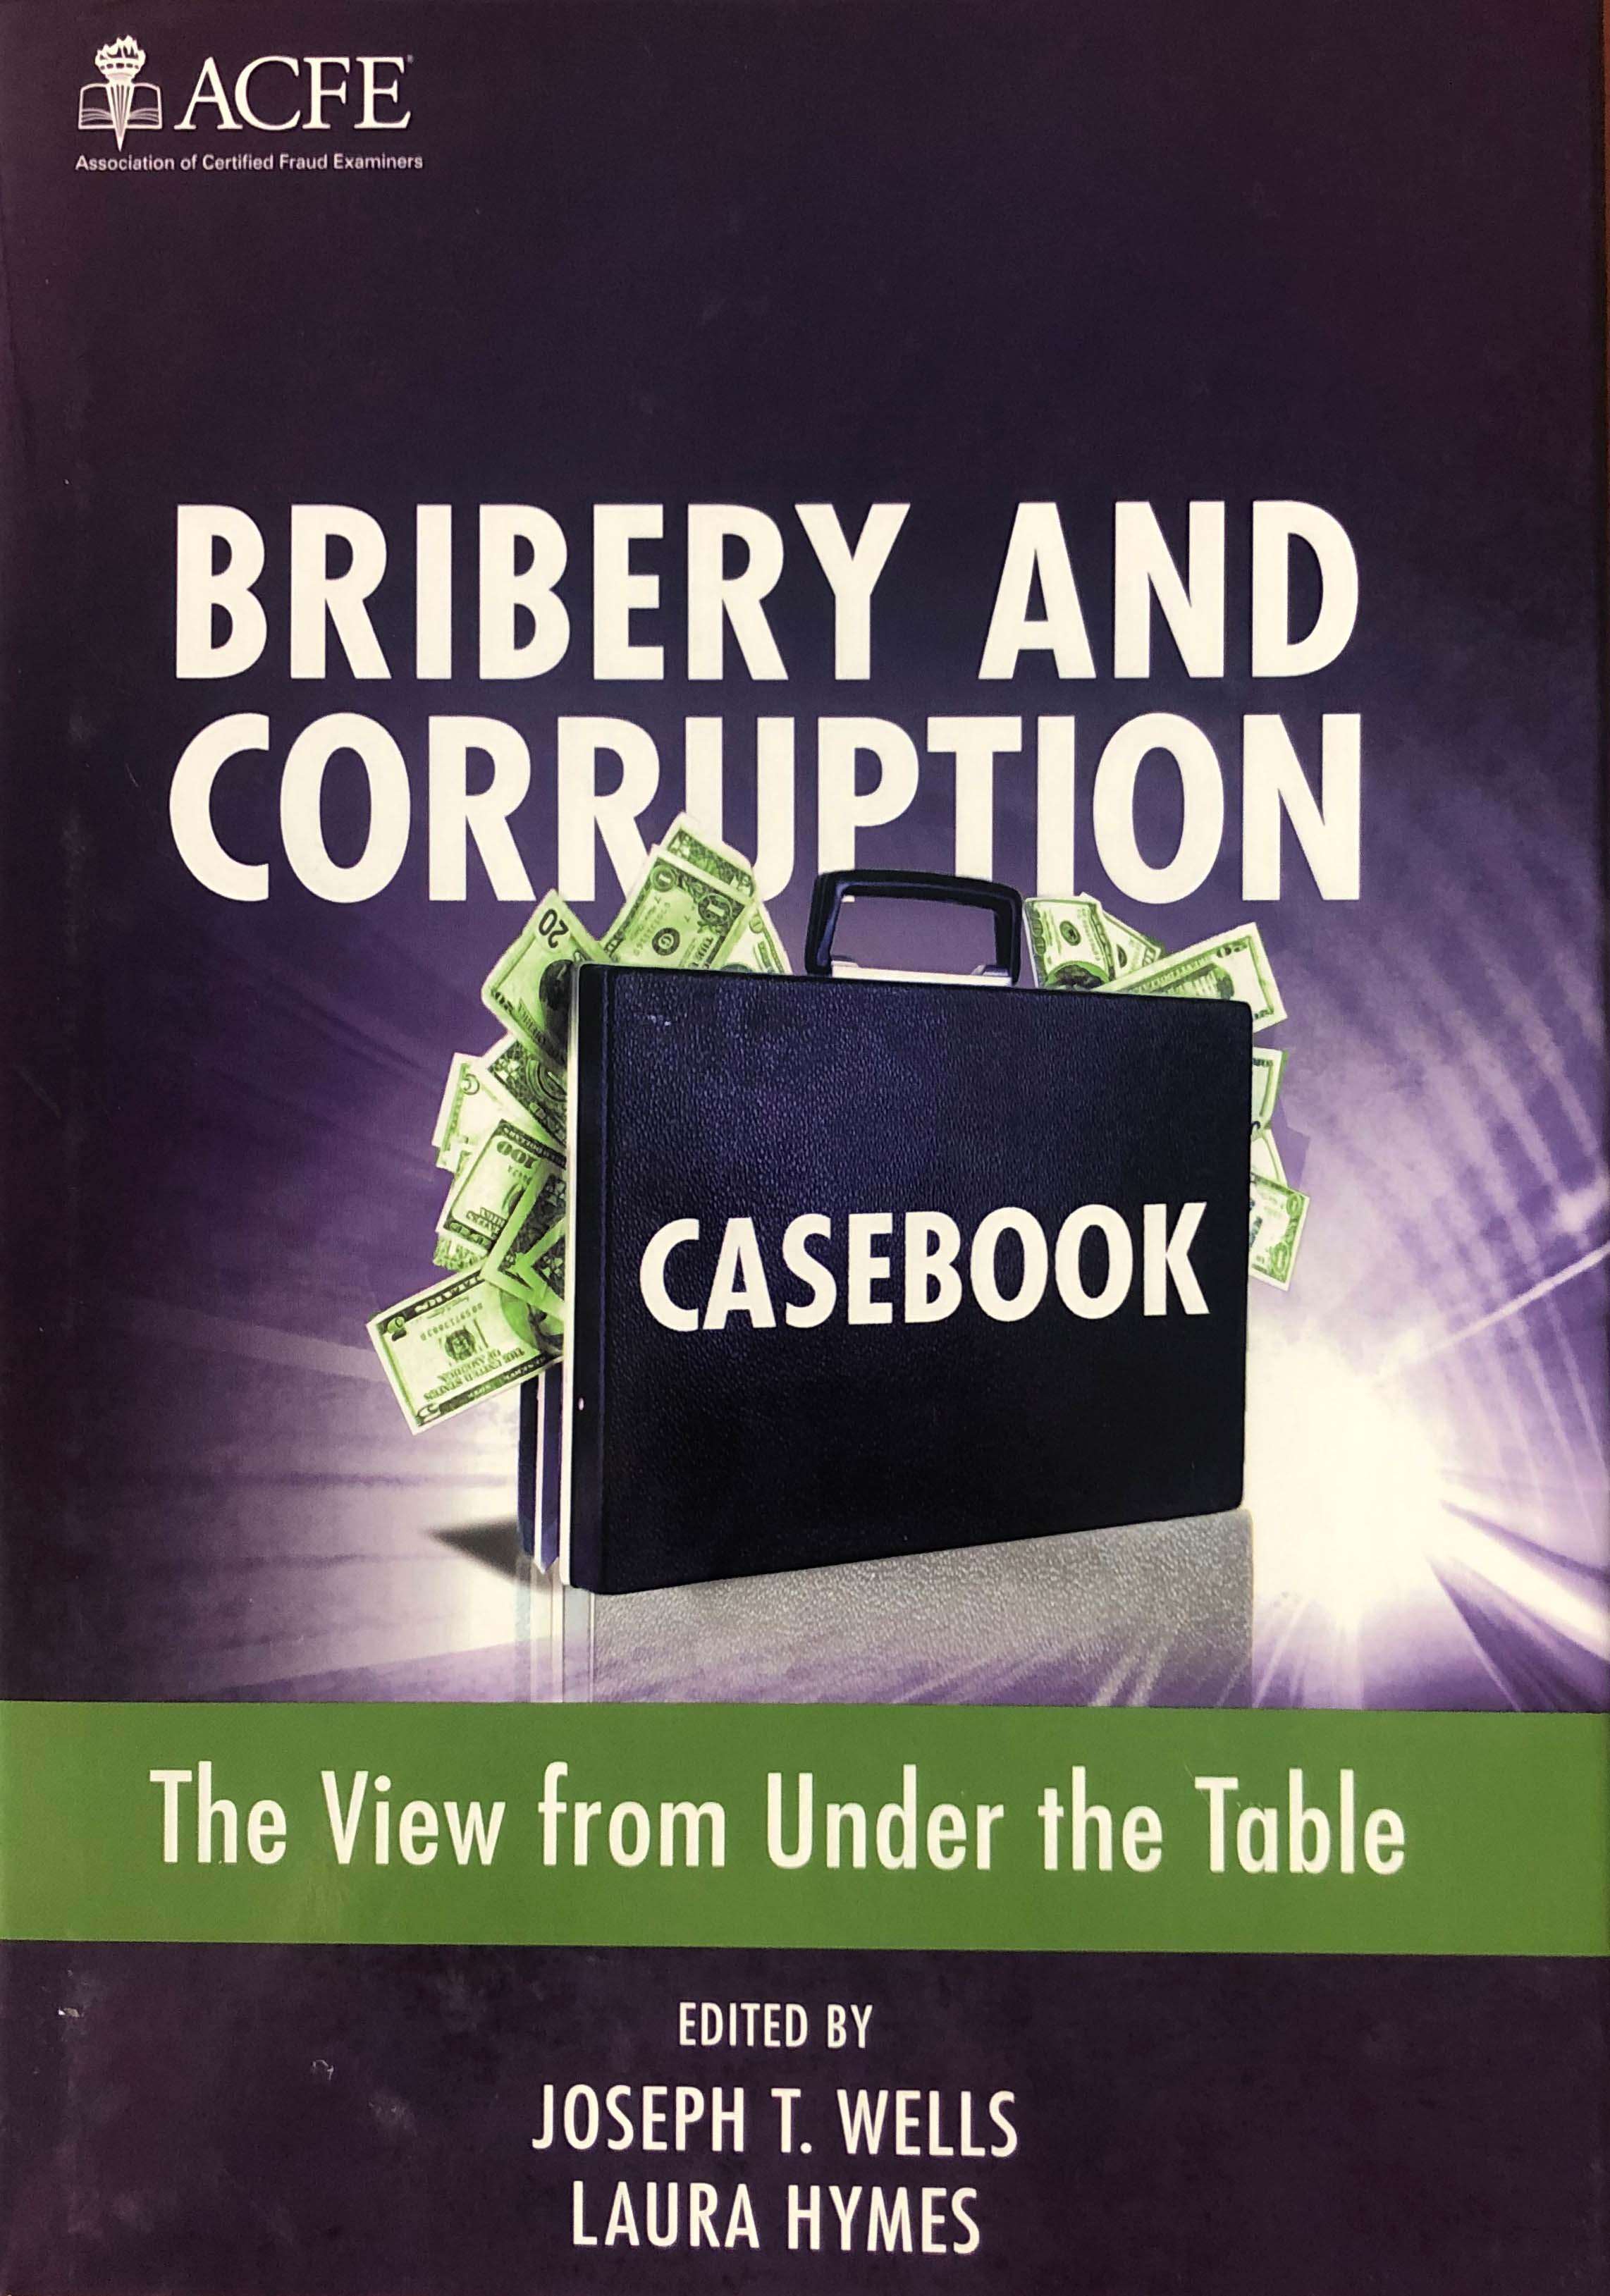 Description Bribery and Corruption Casebook: The View from Under the Table